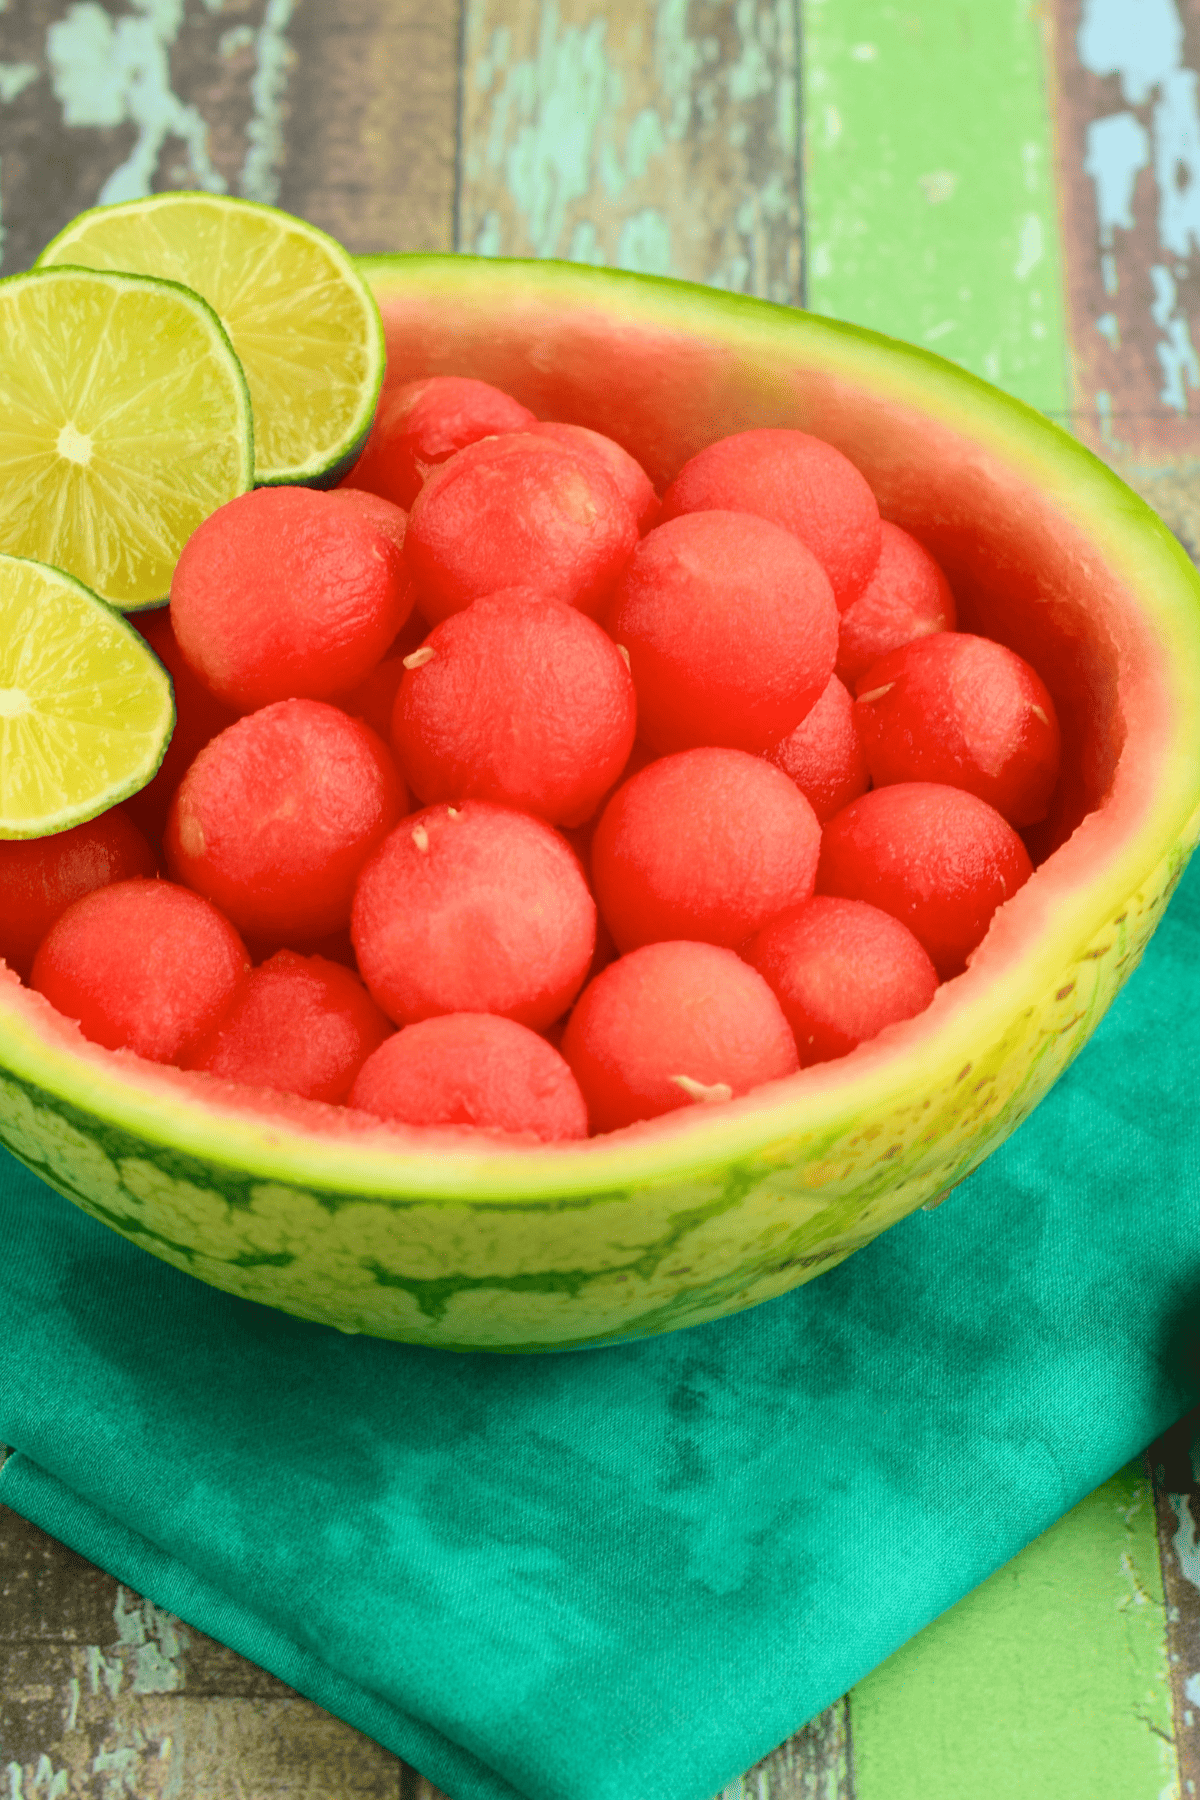 a melon bowl full of melon balls with limes slices garnishing the top.